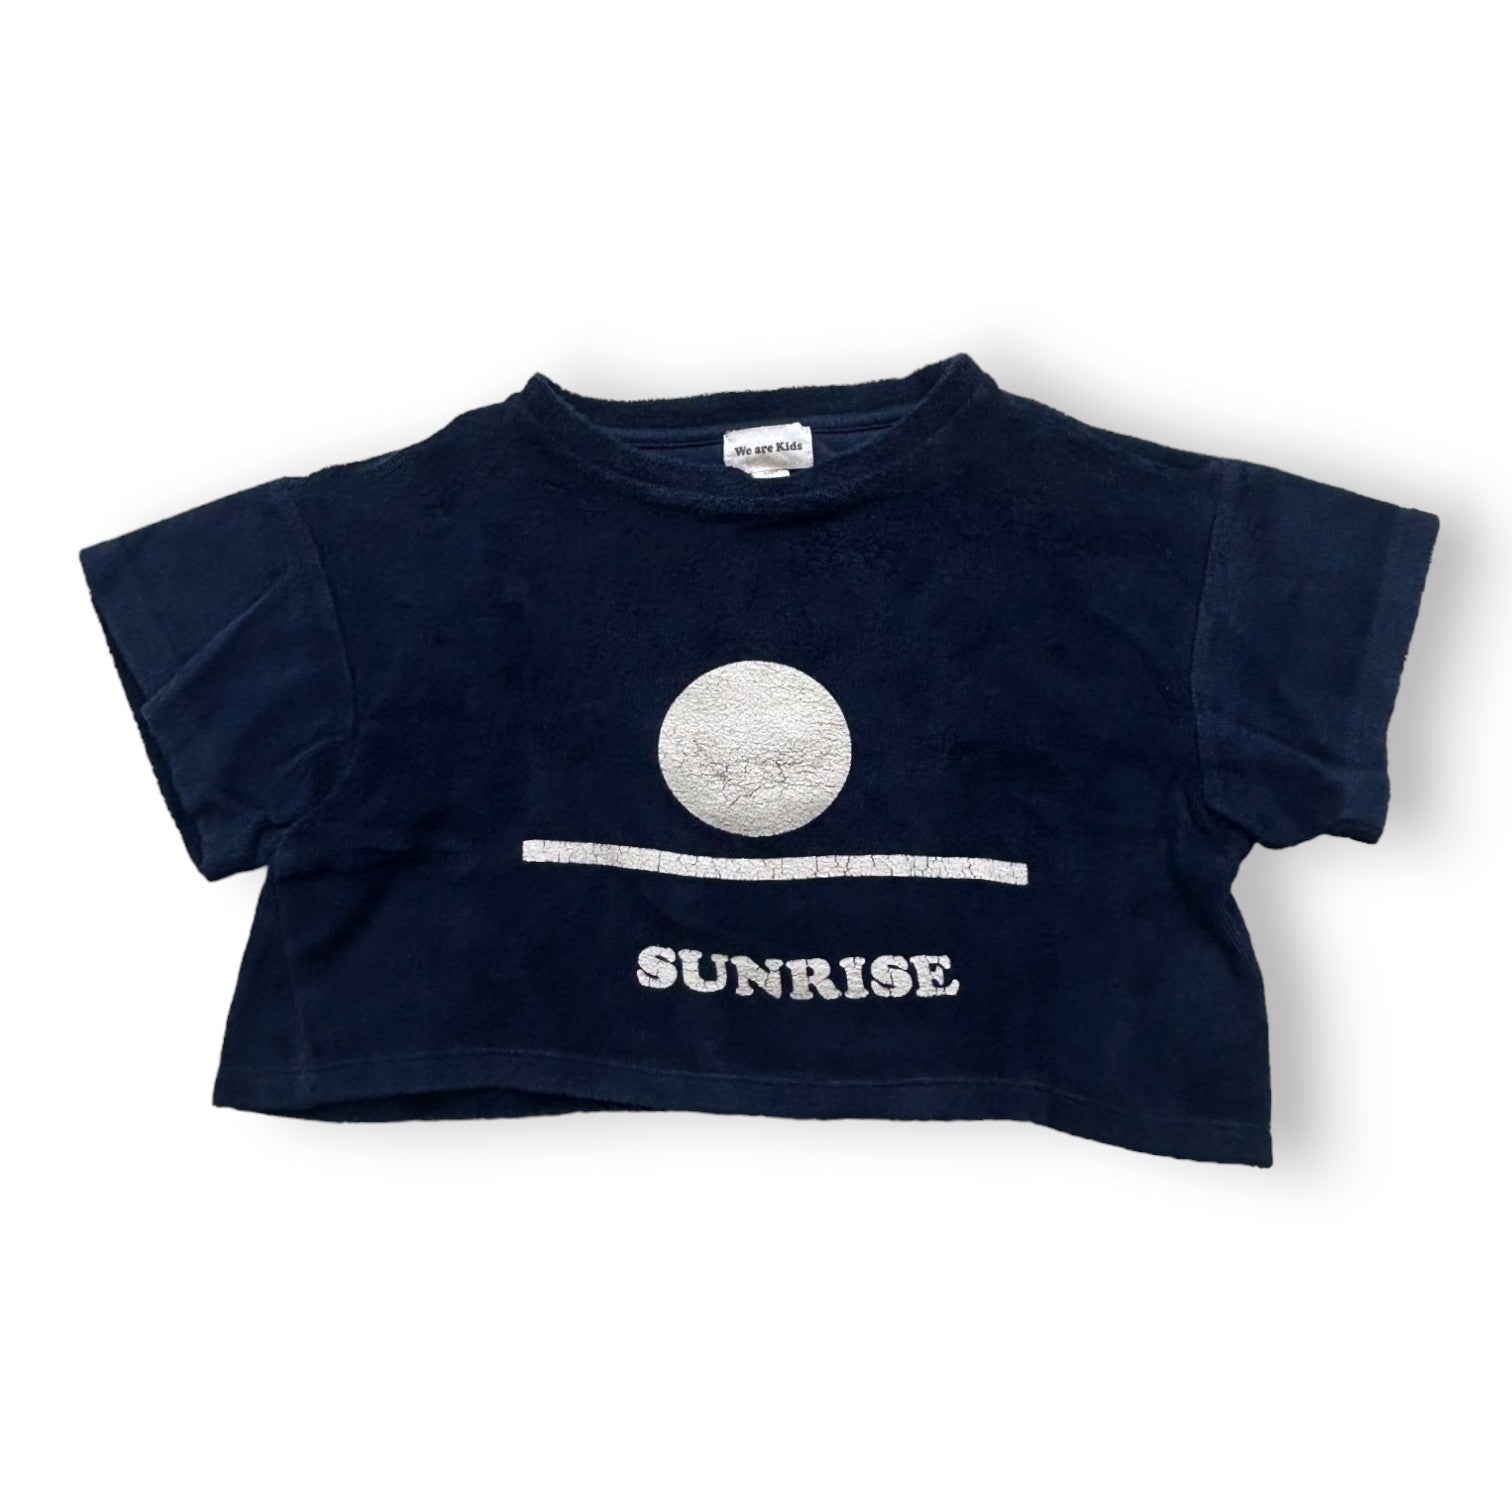 WE ARE KIDS - Pull manches courtes "sunrise" - 2 ans